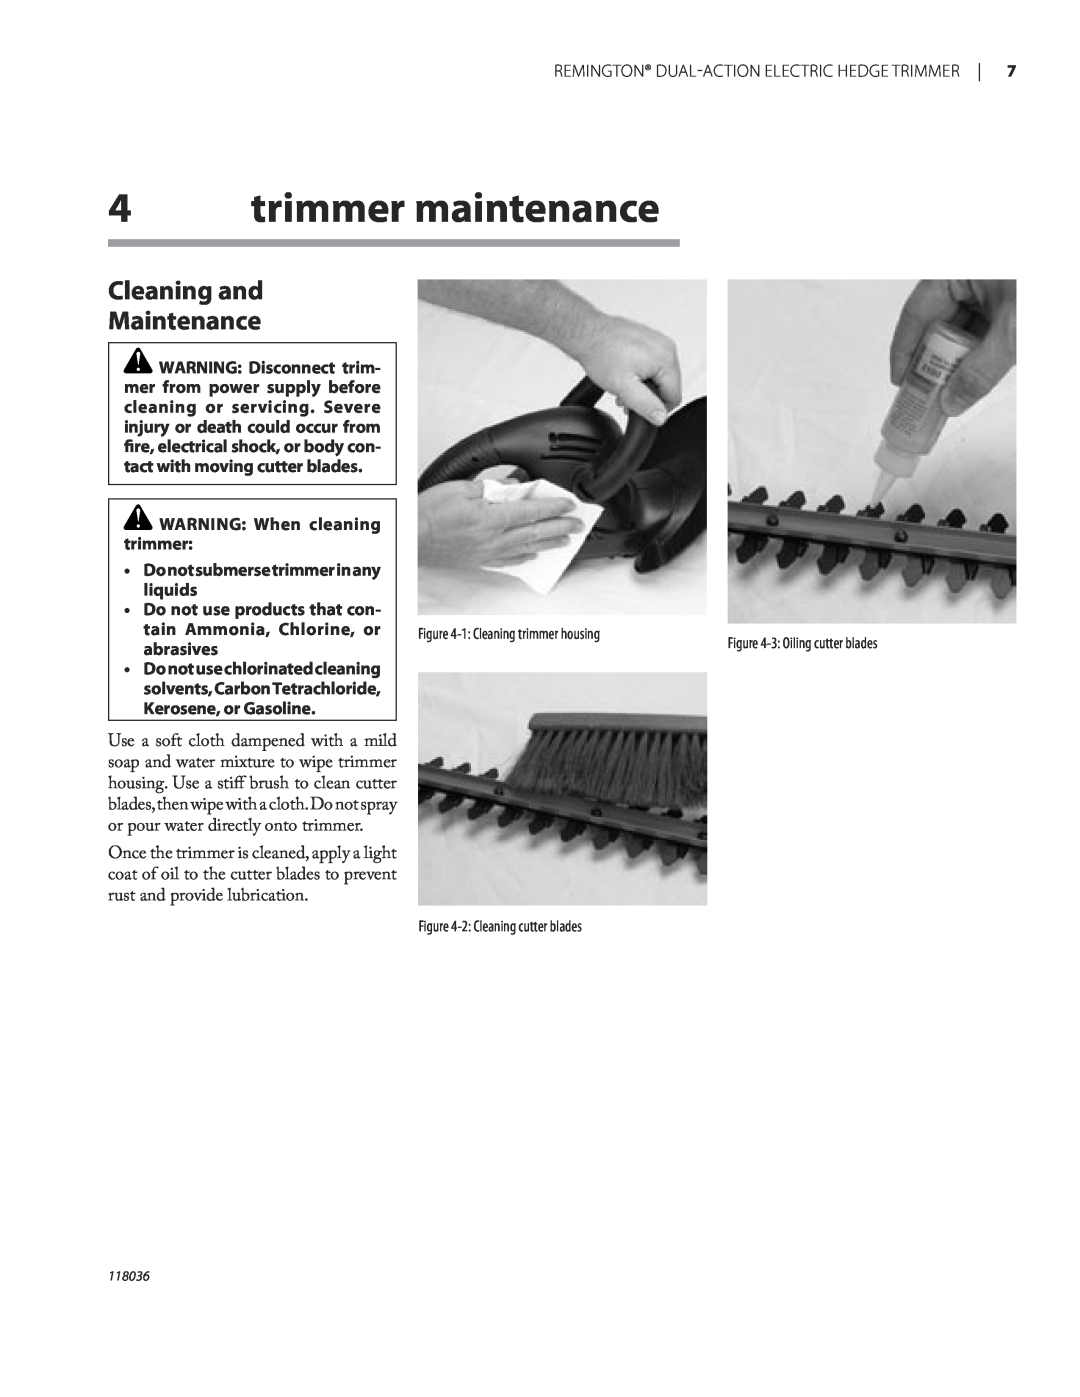 Remington HT3218A, HT4022A owner manual trimmer maintenance, Cleaning and Maintenance, WARNING: When cleaning trimmer 